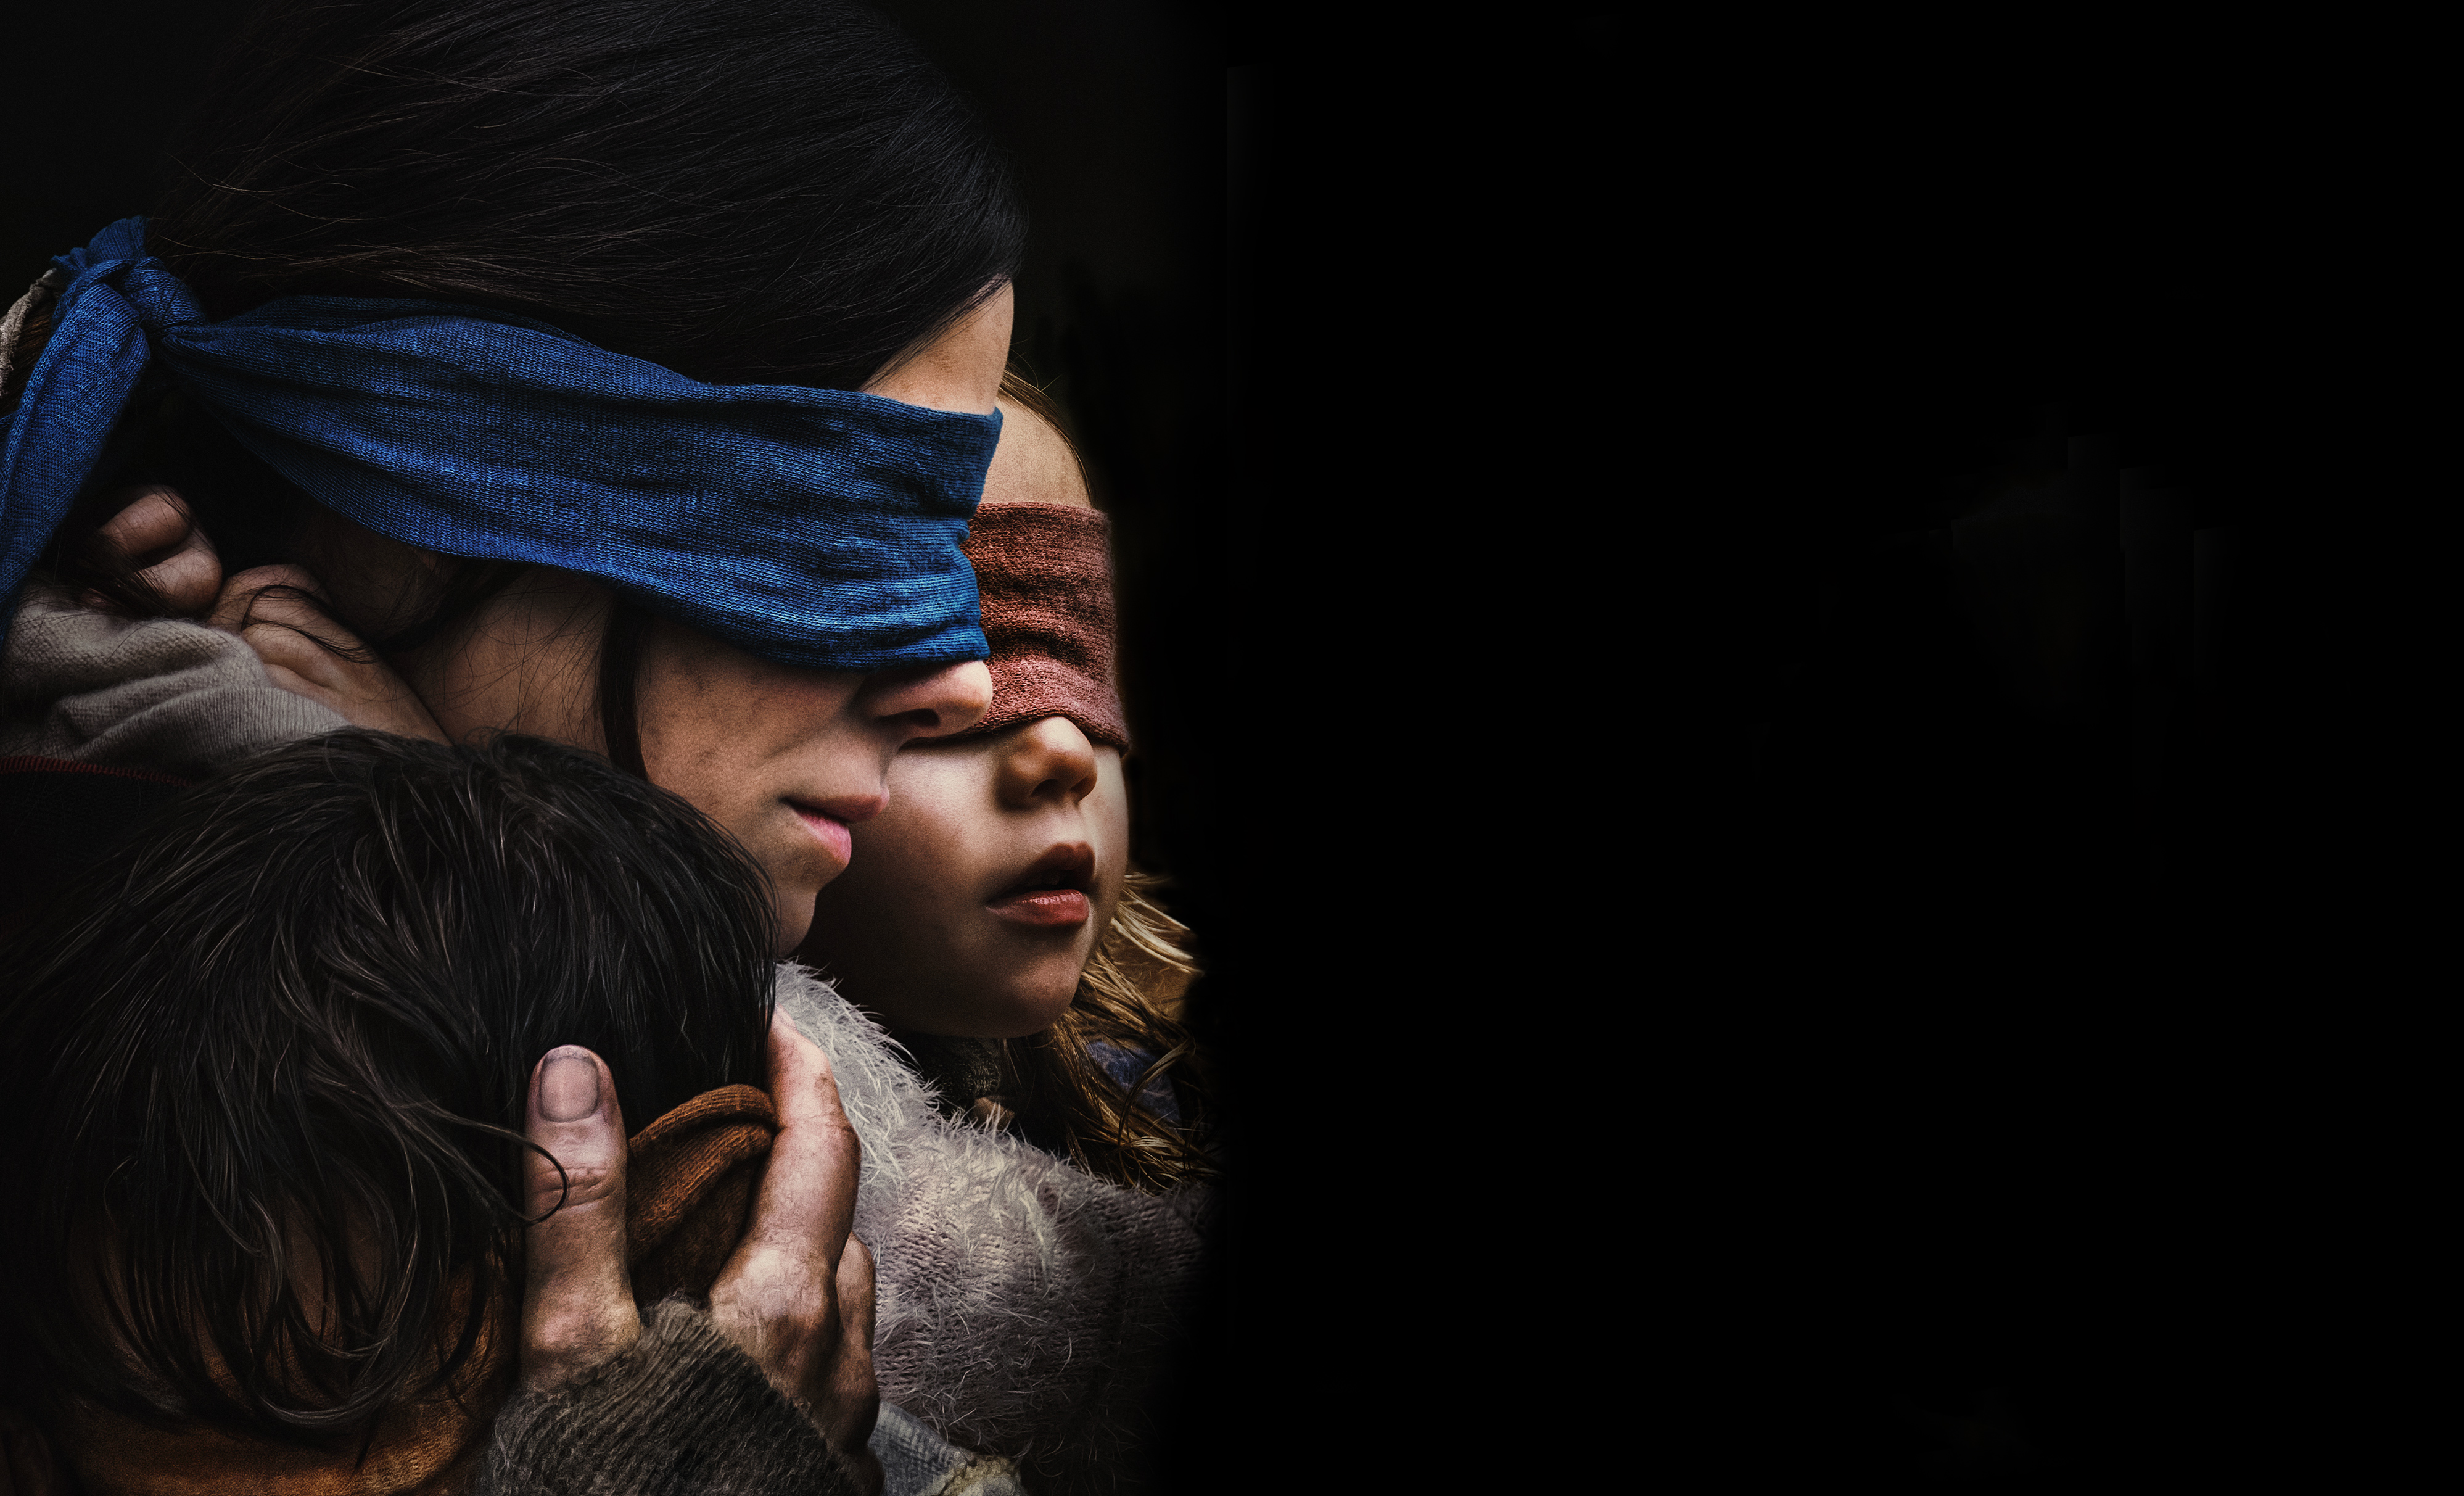 Photo bird box, movies, 2018 movies, netflix - free pictures on Fonwall